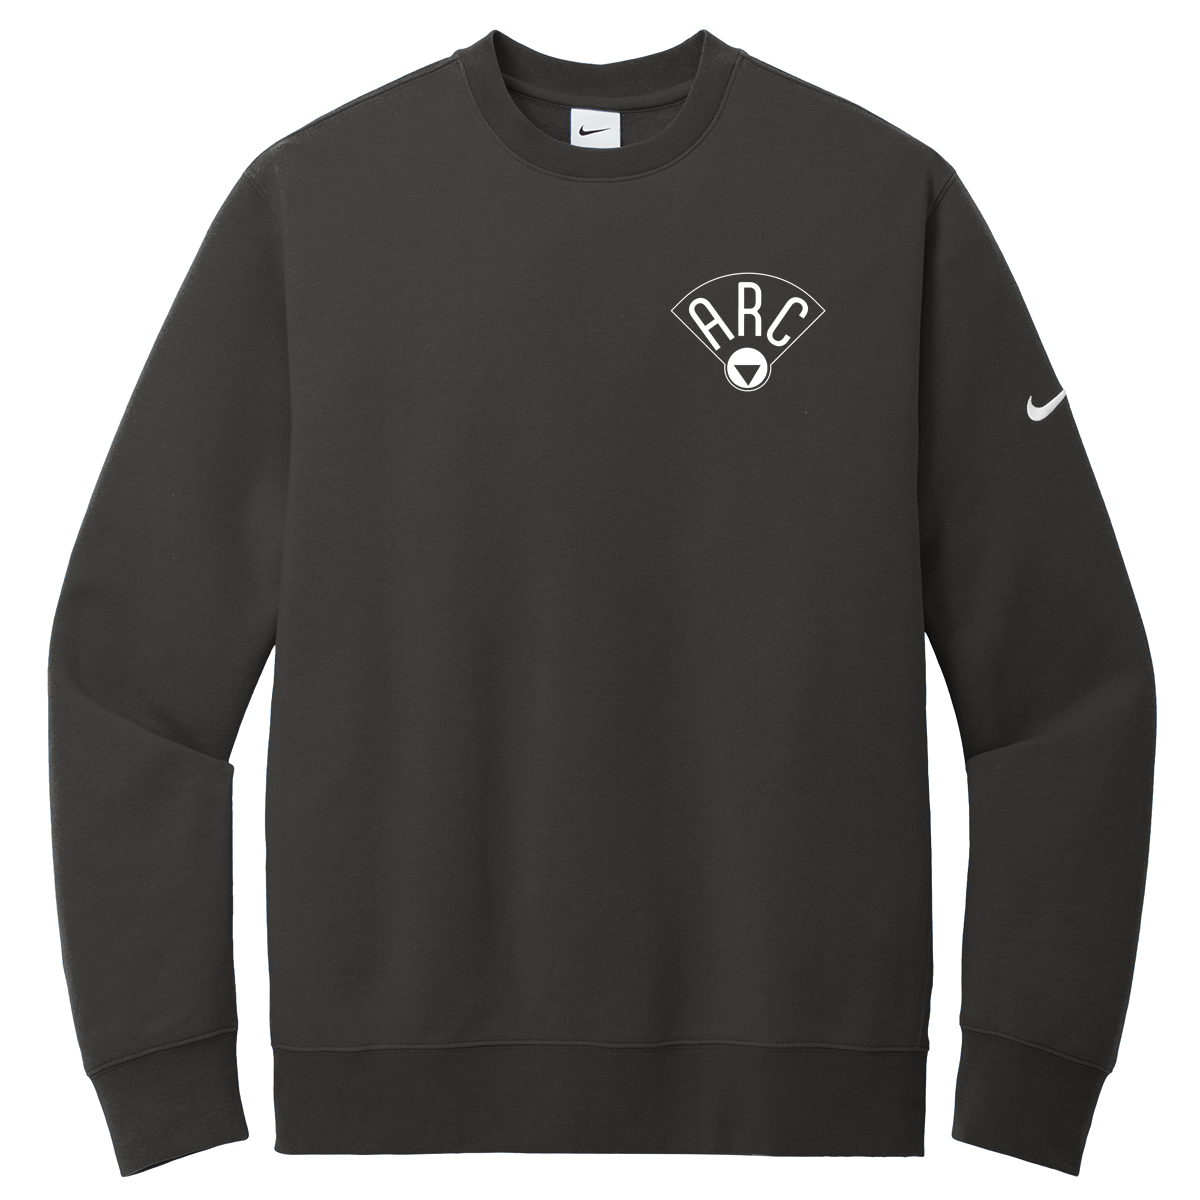 Arc Lacrosse Club Nike Fleece Crew Neck - EMBROIDERED *Highly Suggested for Team Travel & Games*